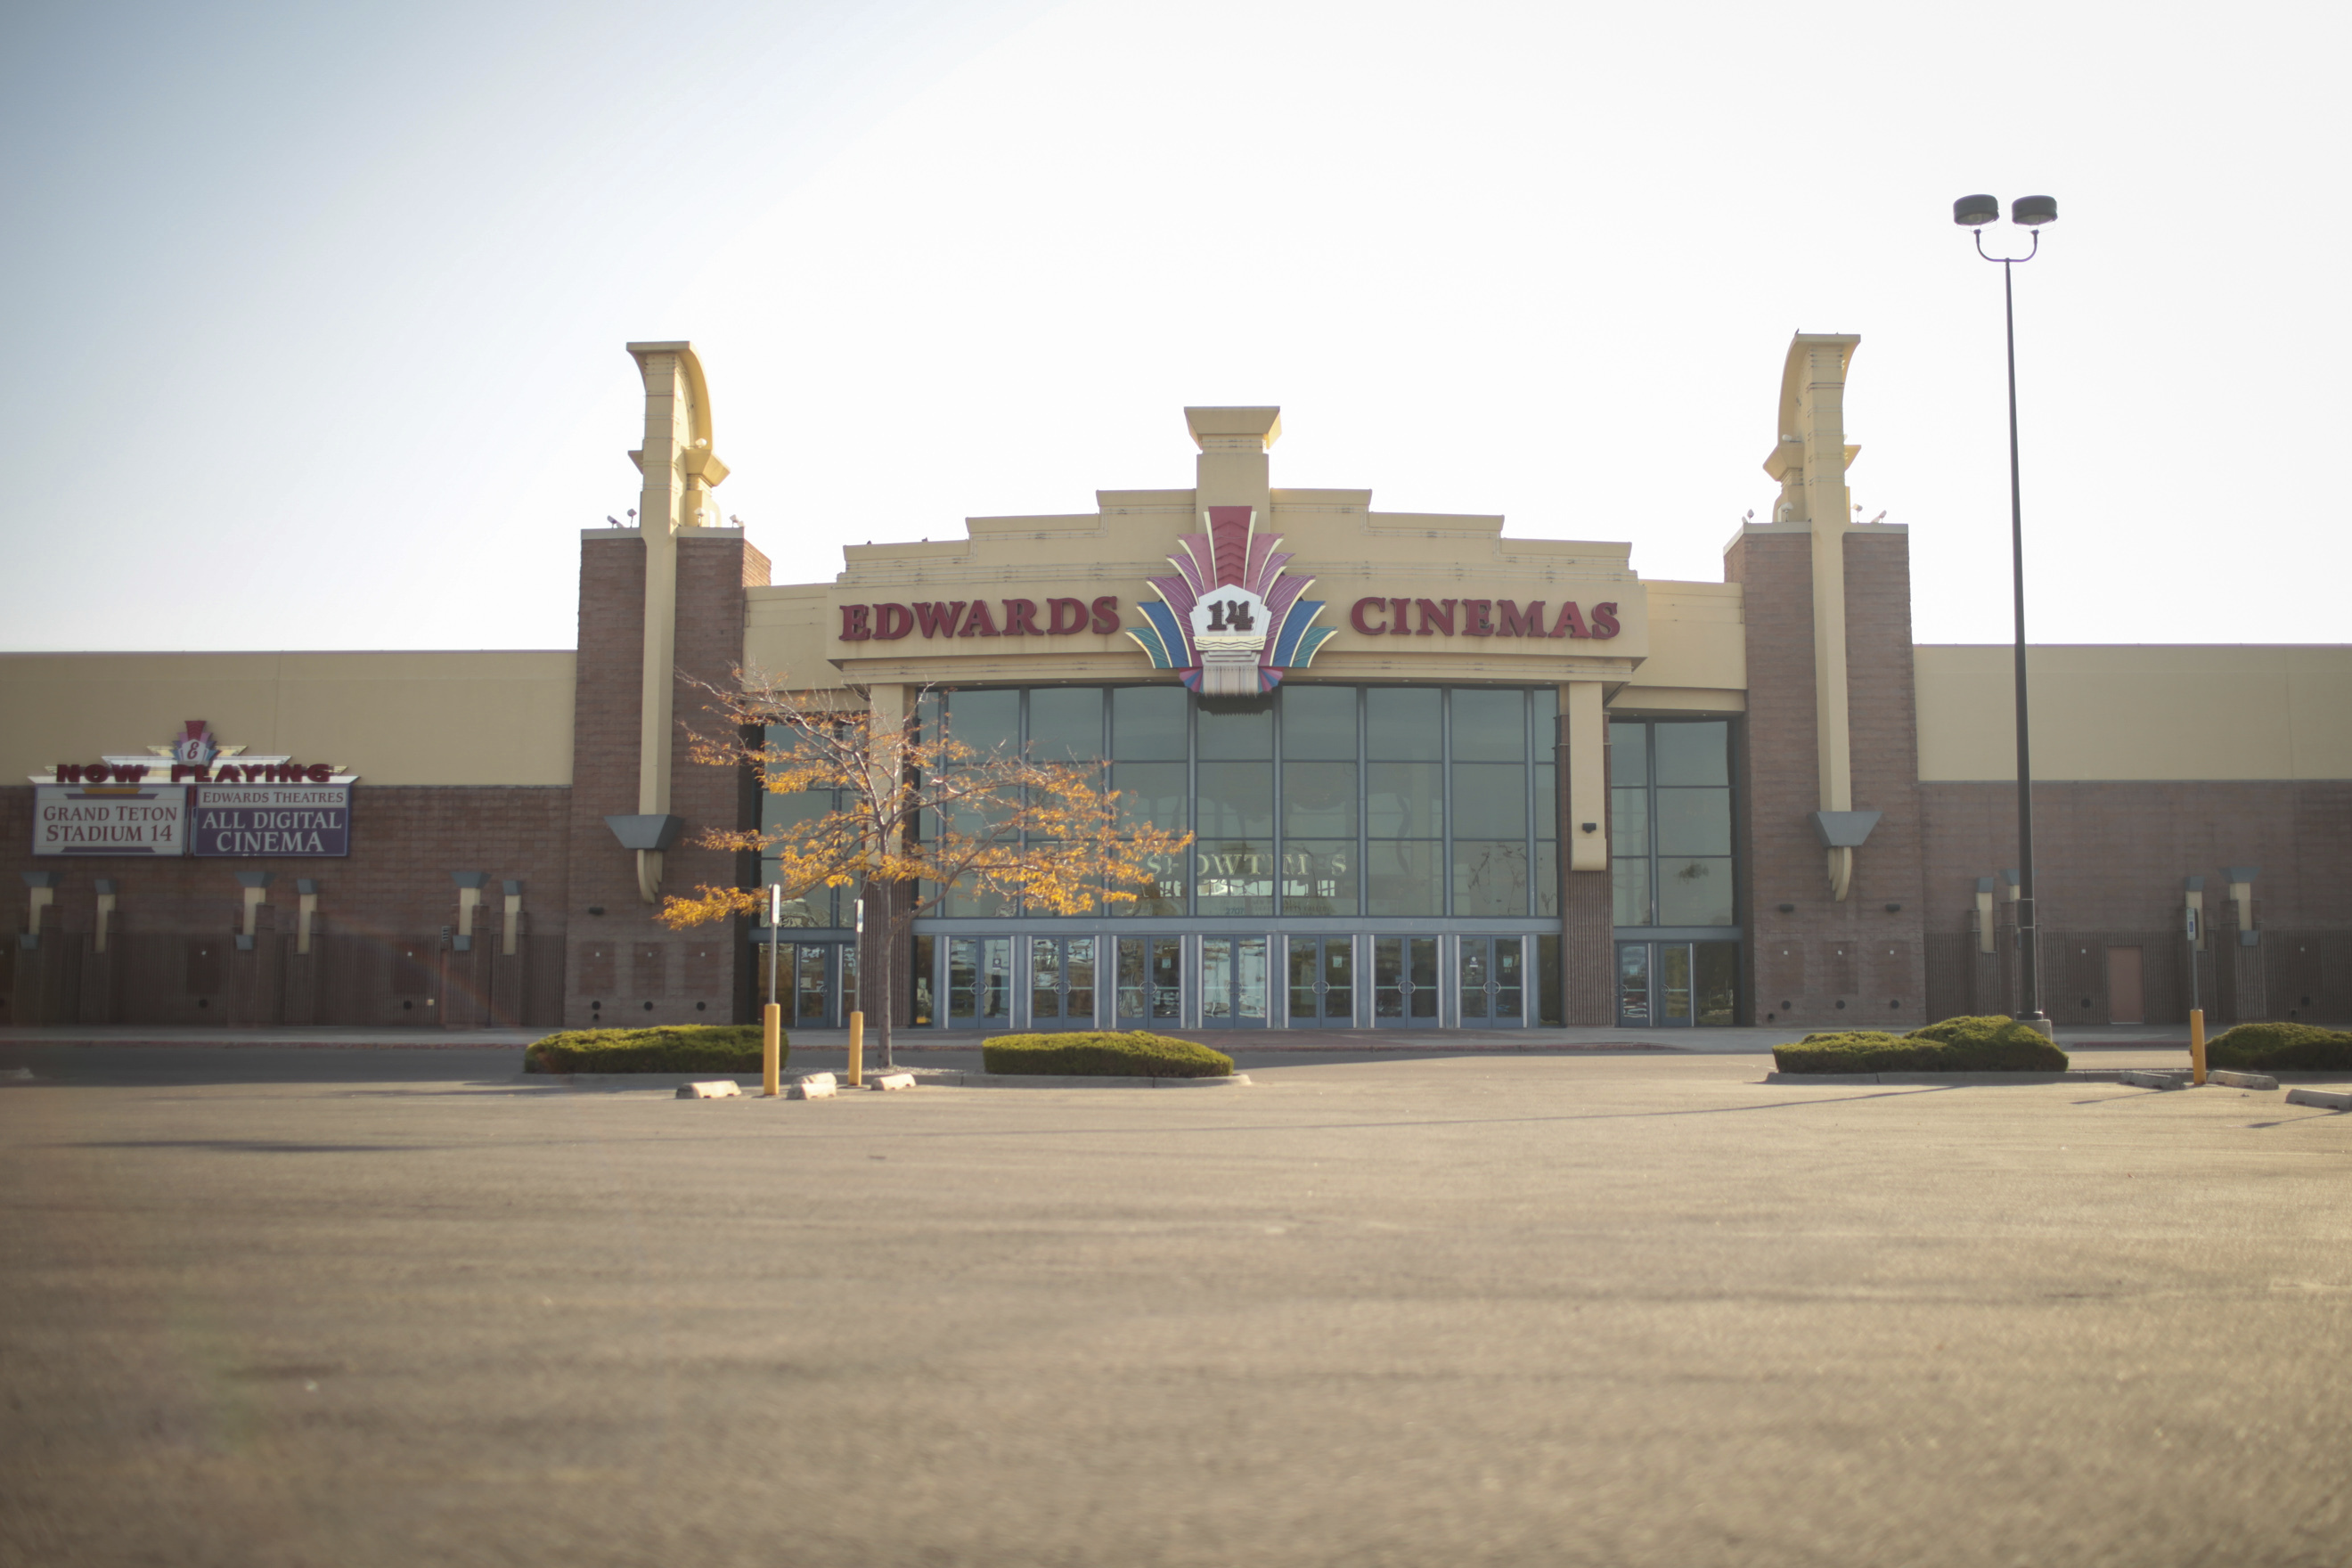 Movie Theaters At A Crisis Point As Regal Shutdown Dampens Recovery Hopes